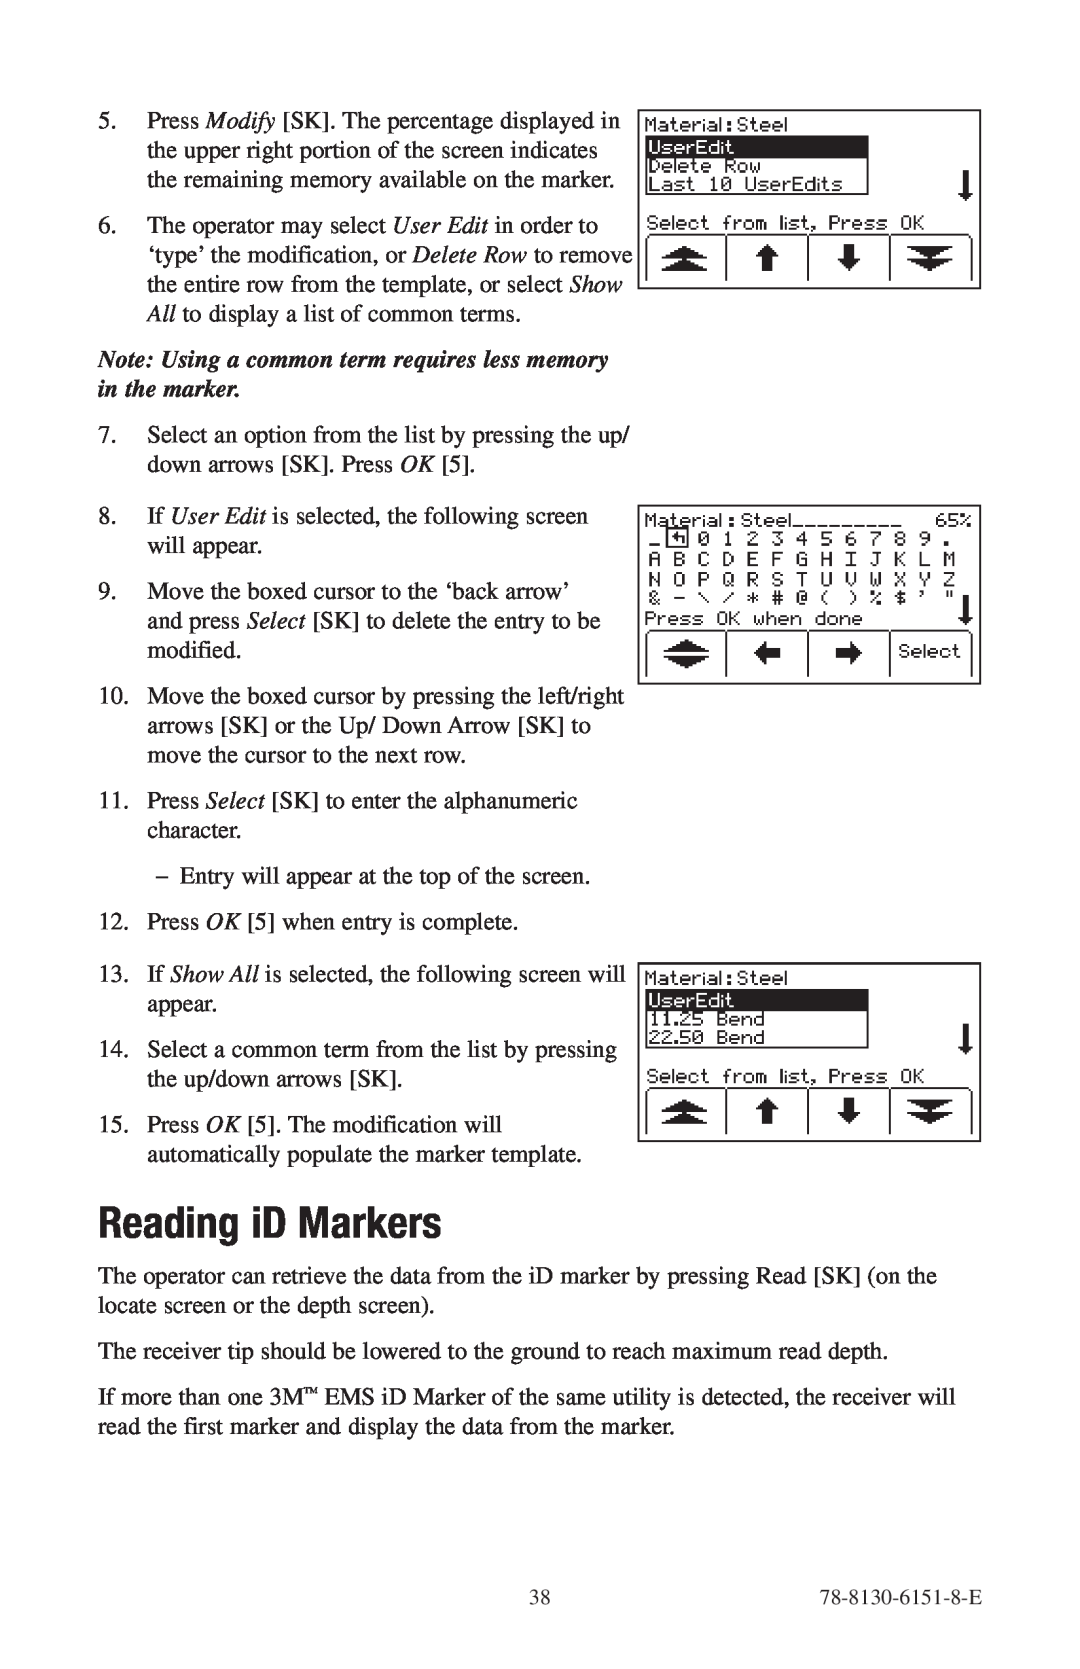 3M 2273ME-iD, 2250ME-iD manual Reading iD Markers 